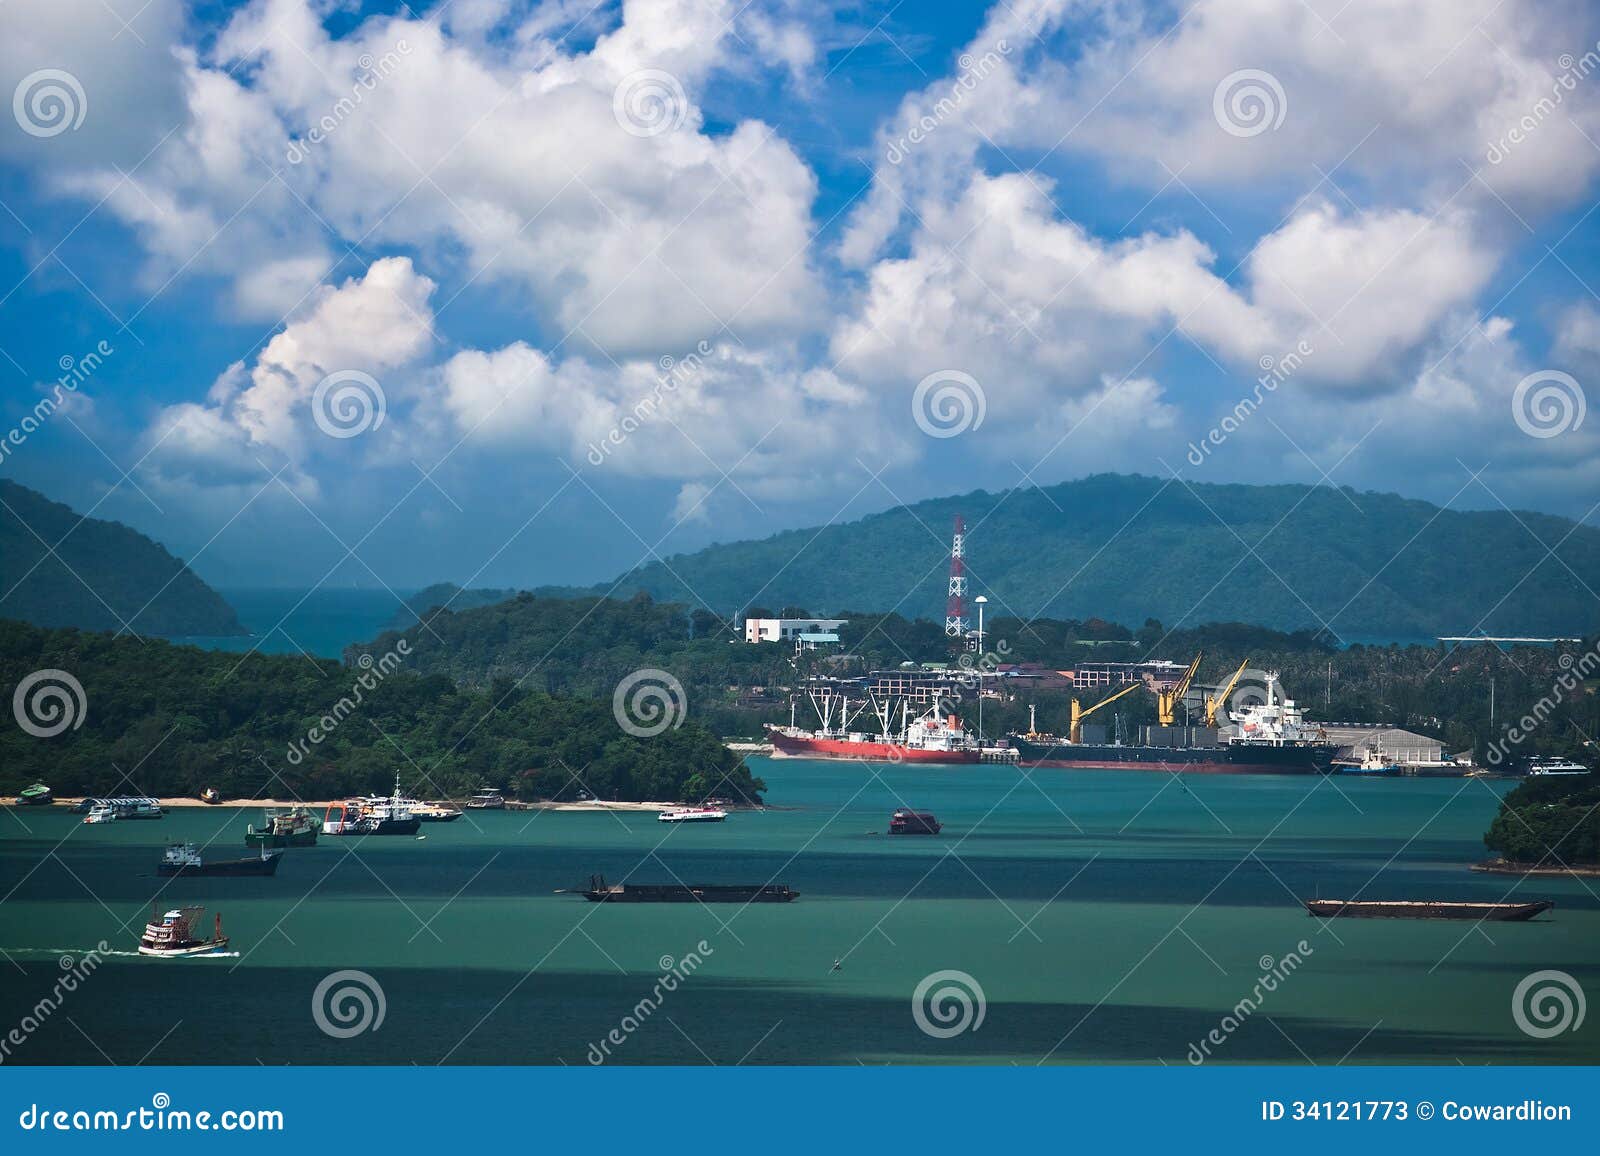 Freight Ships At Phuket Island In Thailand Editorial Stock